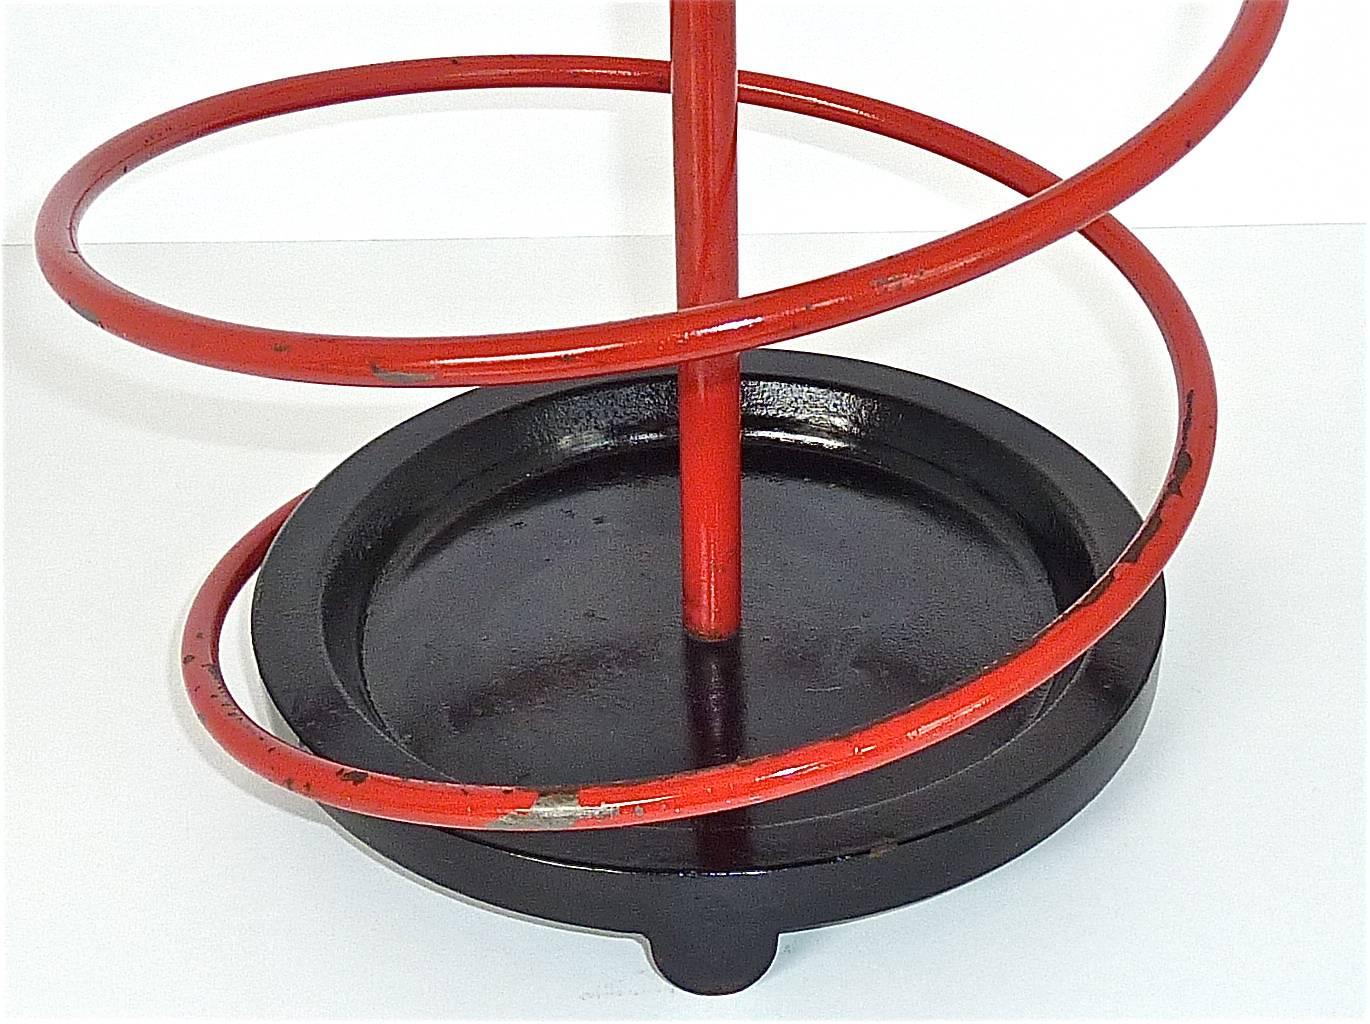 Mid-Century Modern Rare French Modernist Umbrella Stand Red Black Iron Spiral Royere Style 1930s For Sale